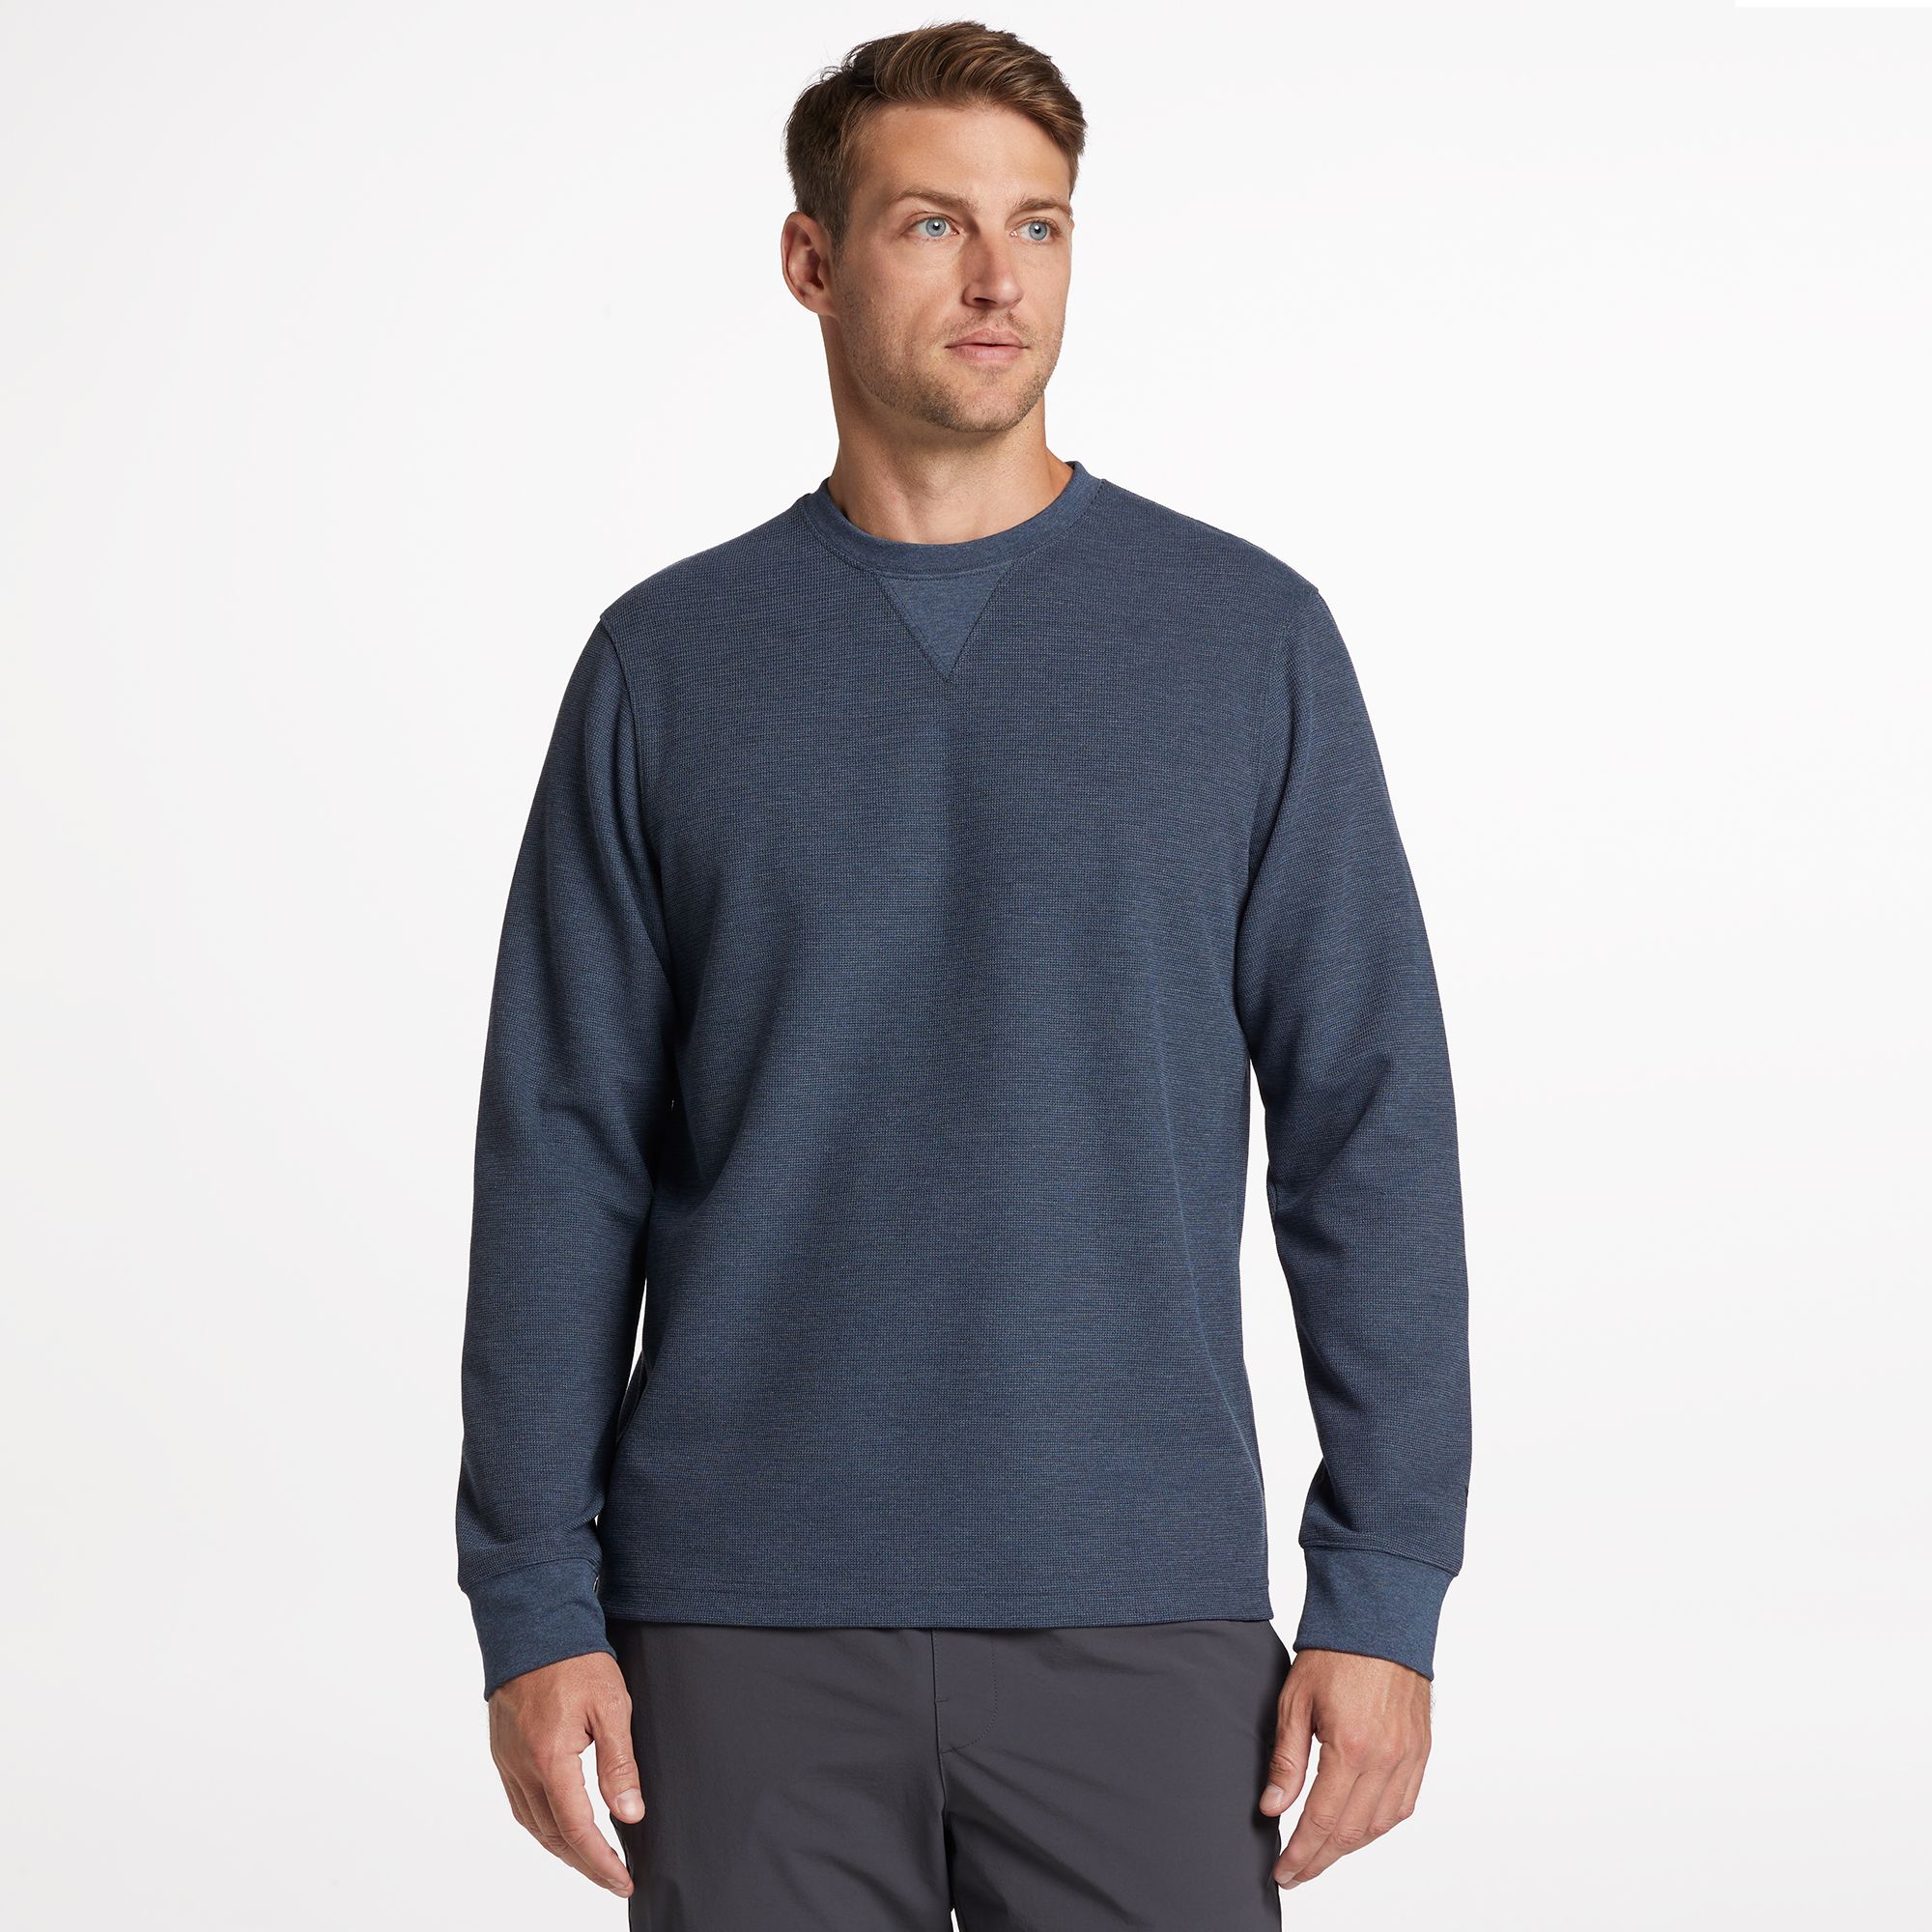 VRST Men's Rest u0026 Recovery Waffle Crew | Dick's Sporting Goods